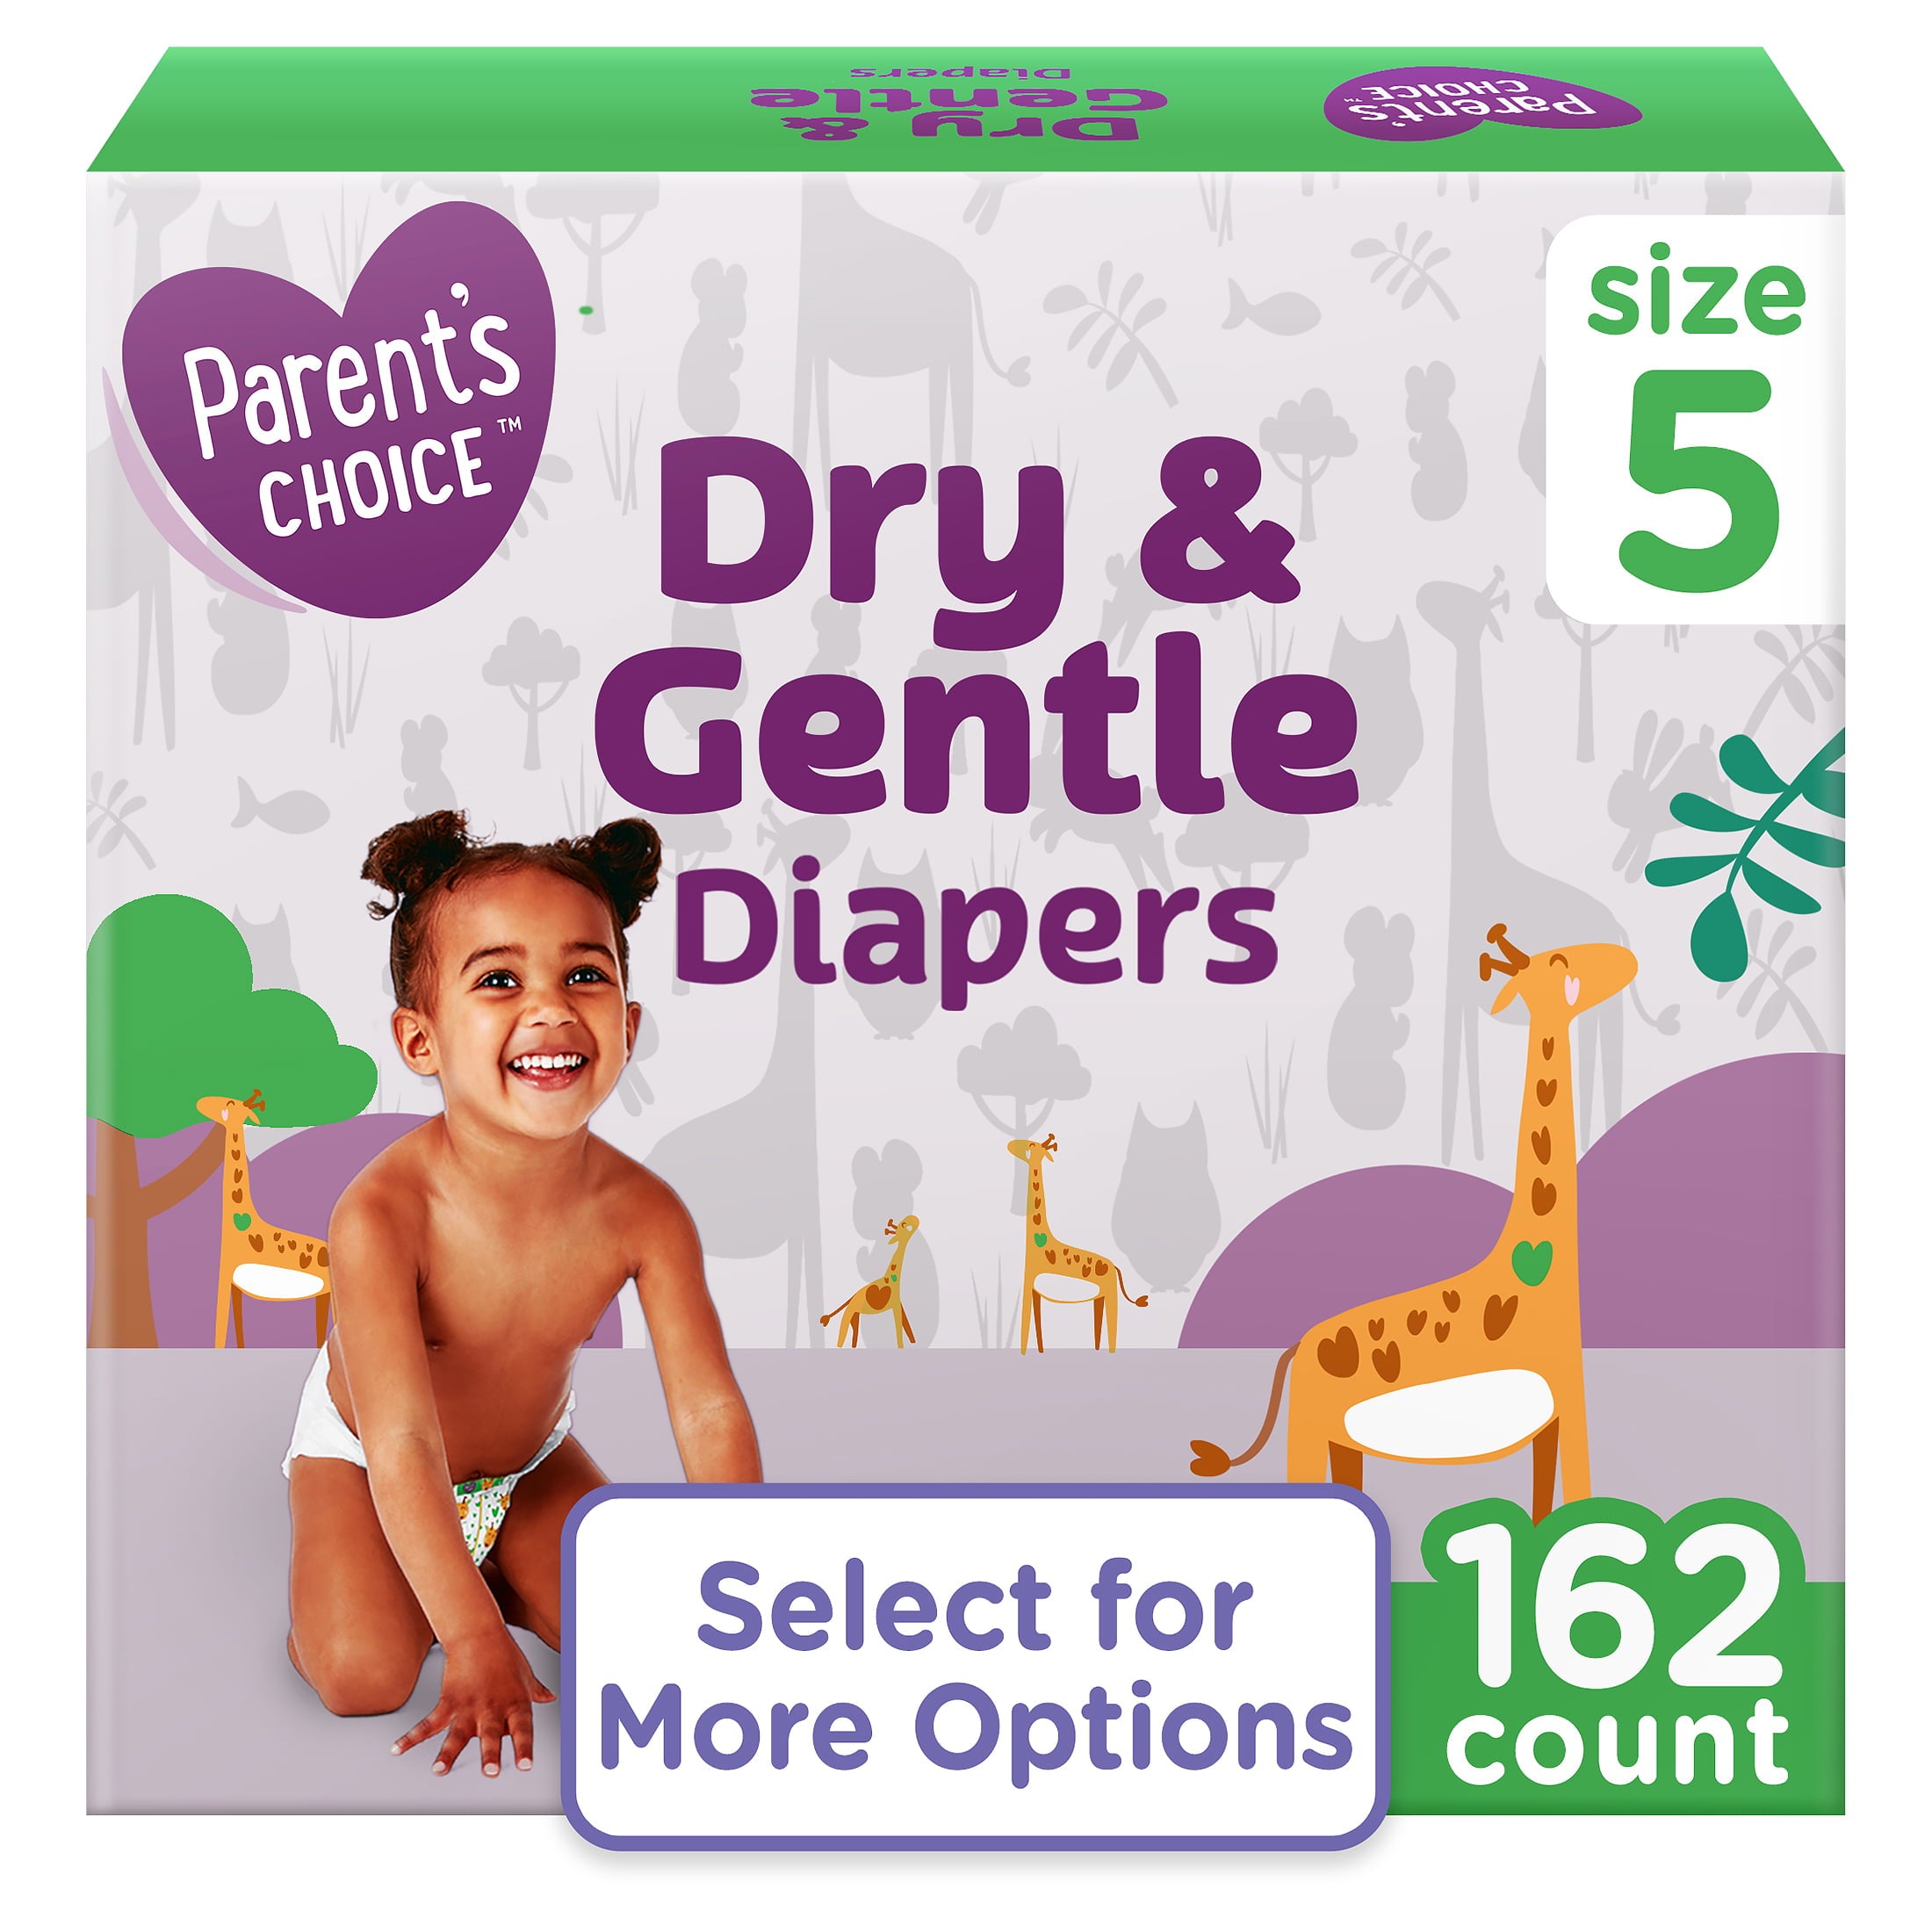 Parent's Choice Dry & Gentle Diapers Size 5, 162 Count